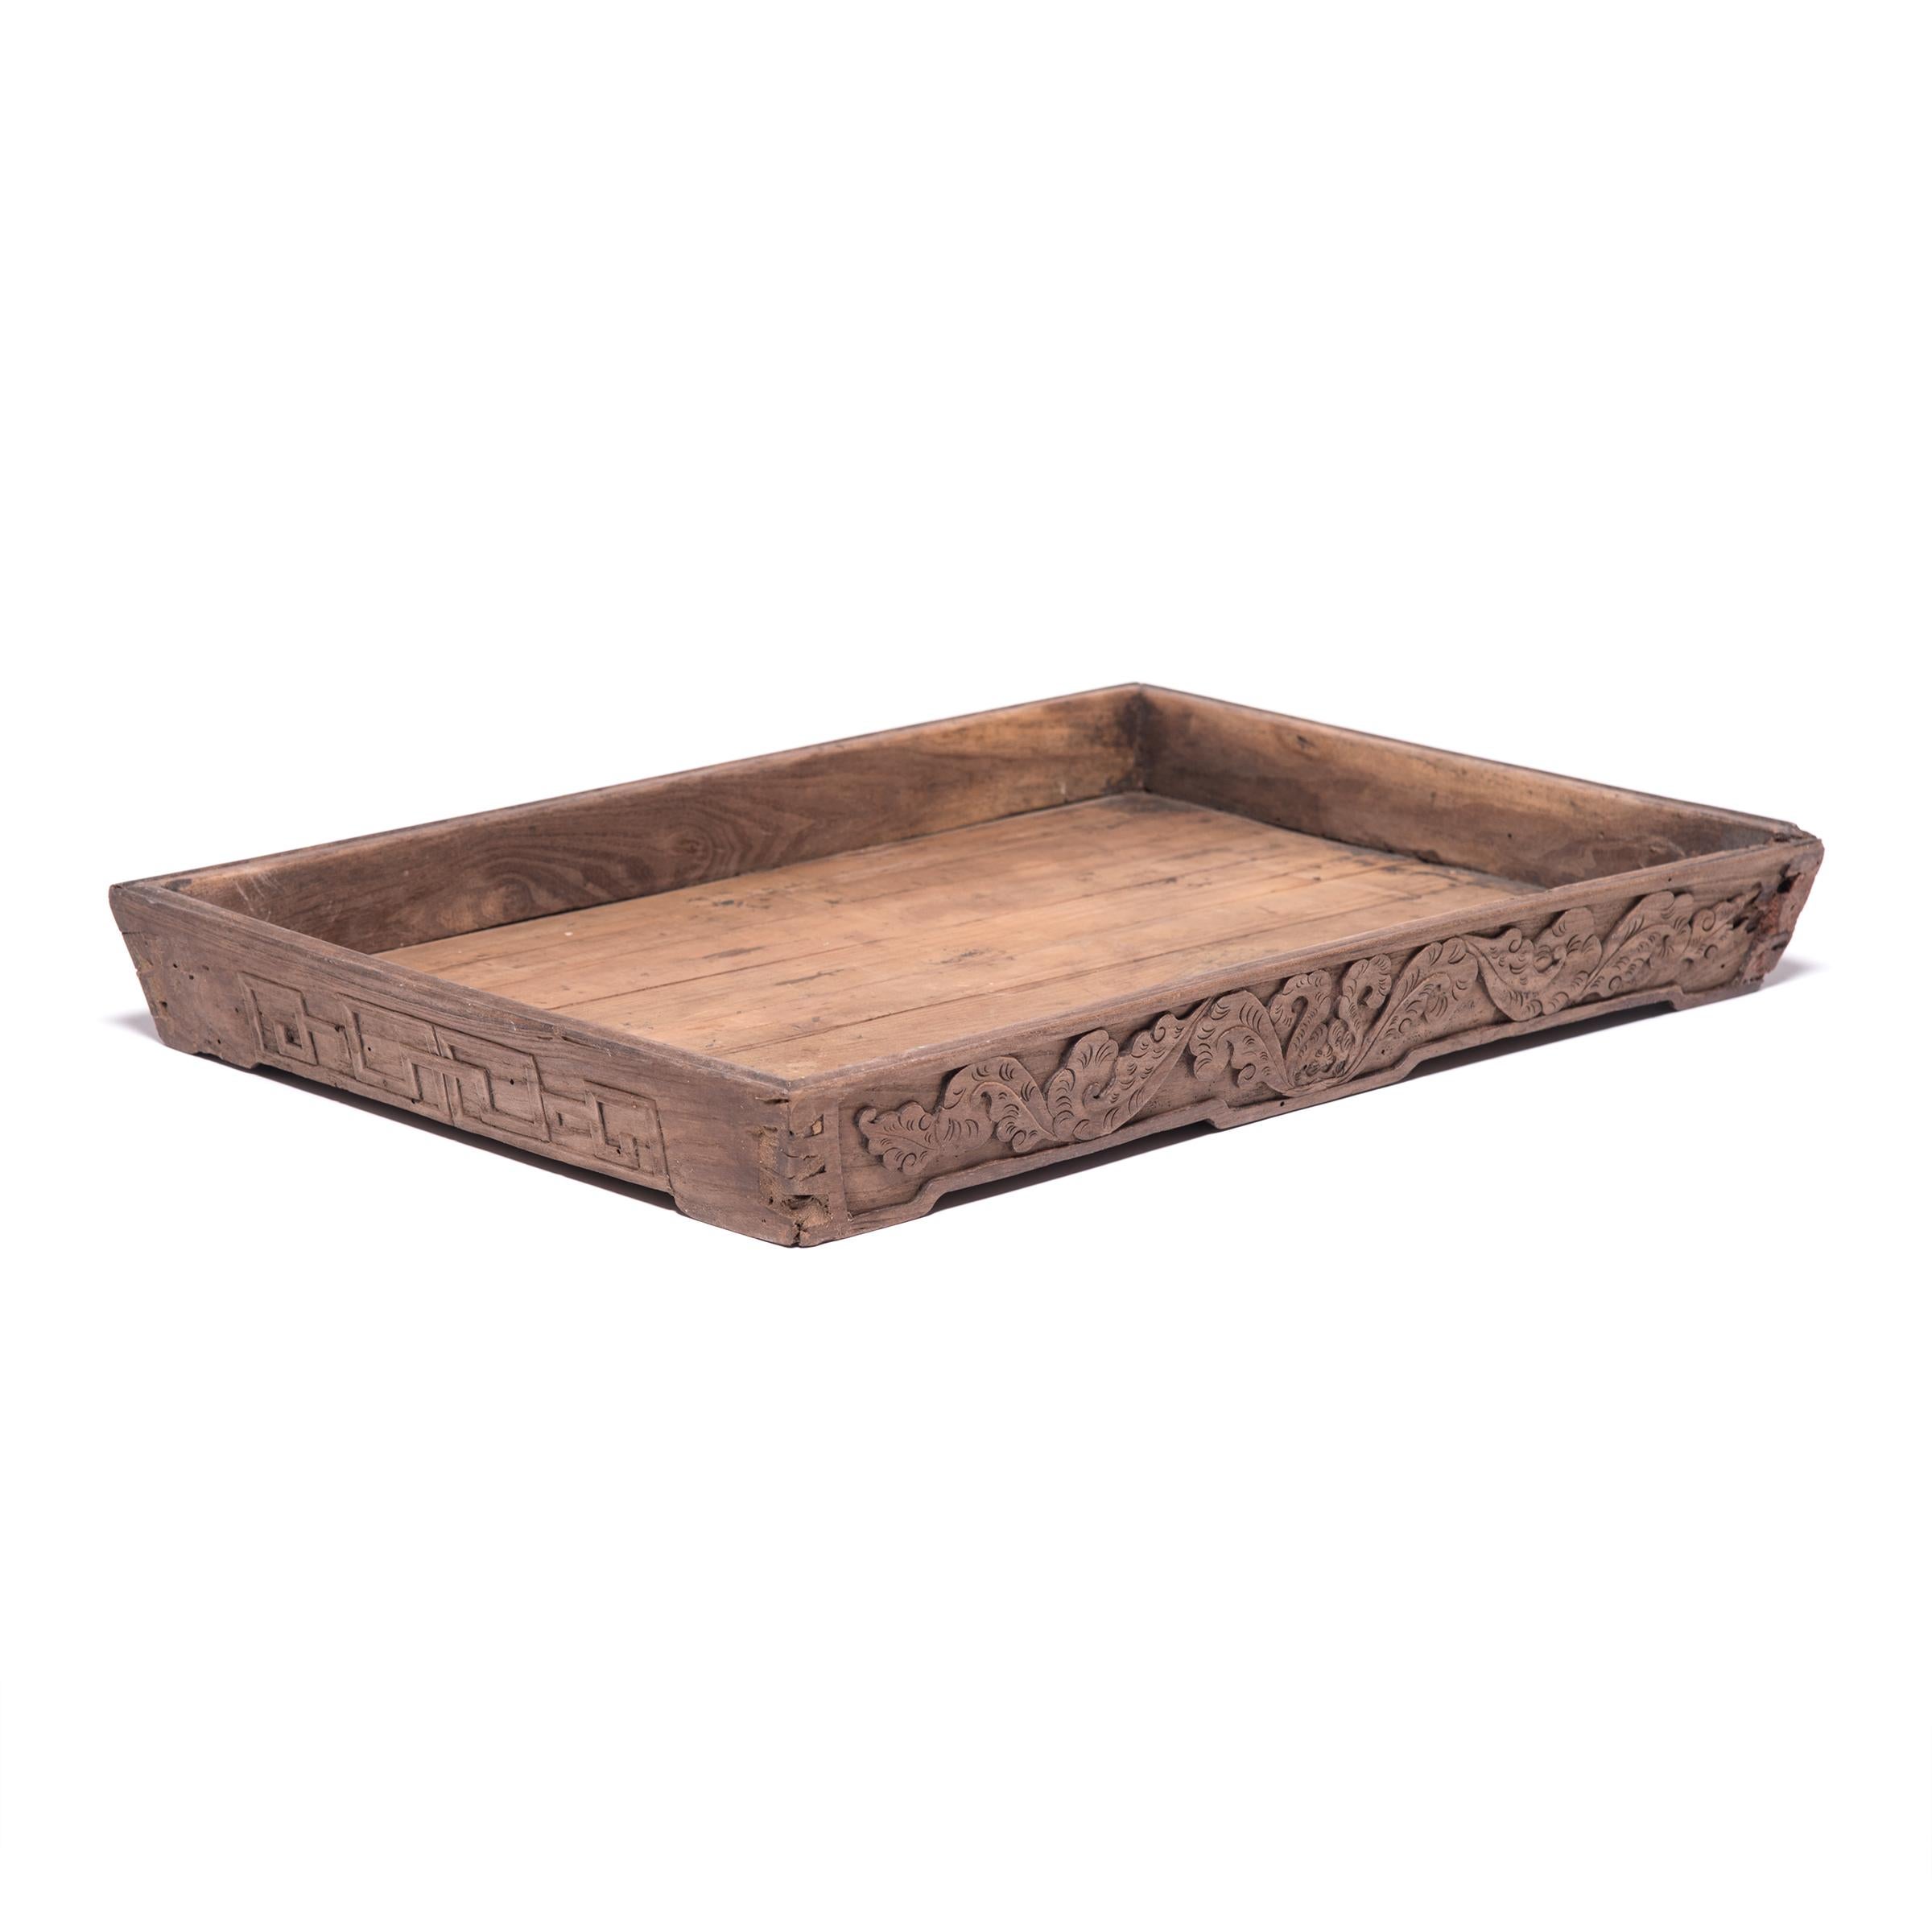 Carved Chinese Floral Tea Tray, circa 1900